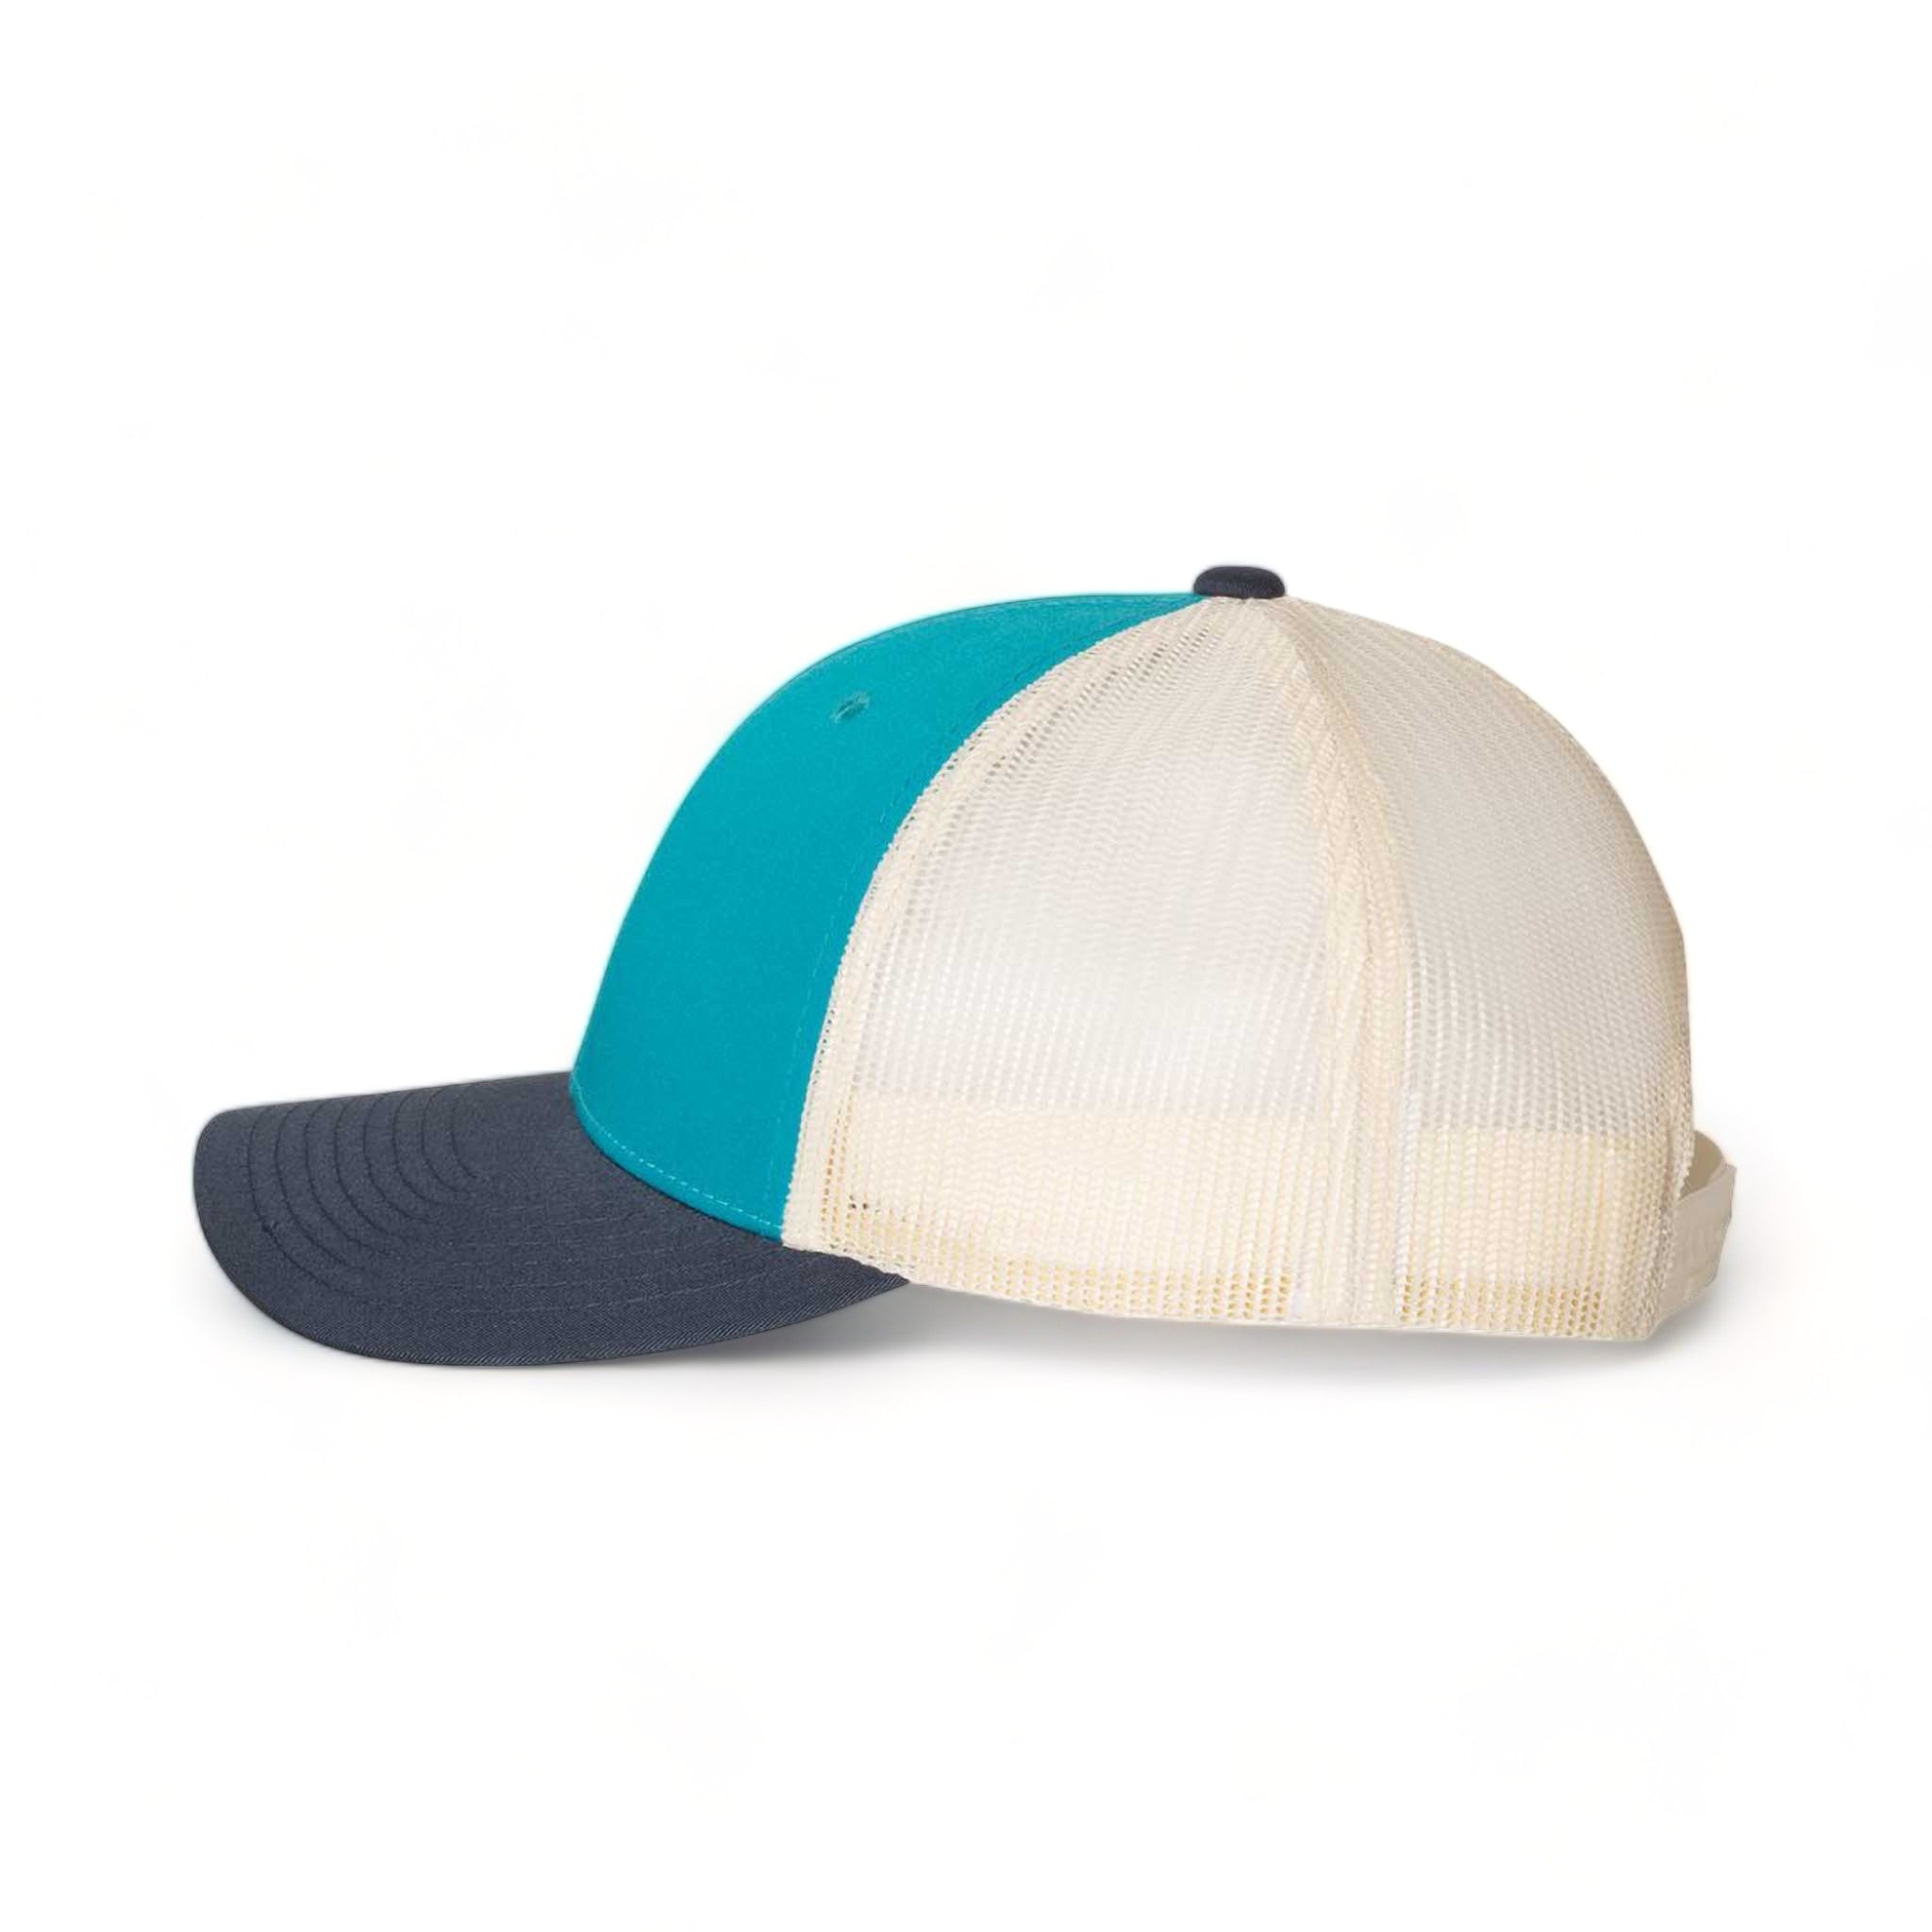 Side view of Richardson 115 custom hat in blue teal, birch and navy